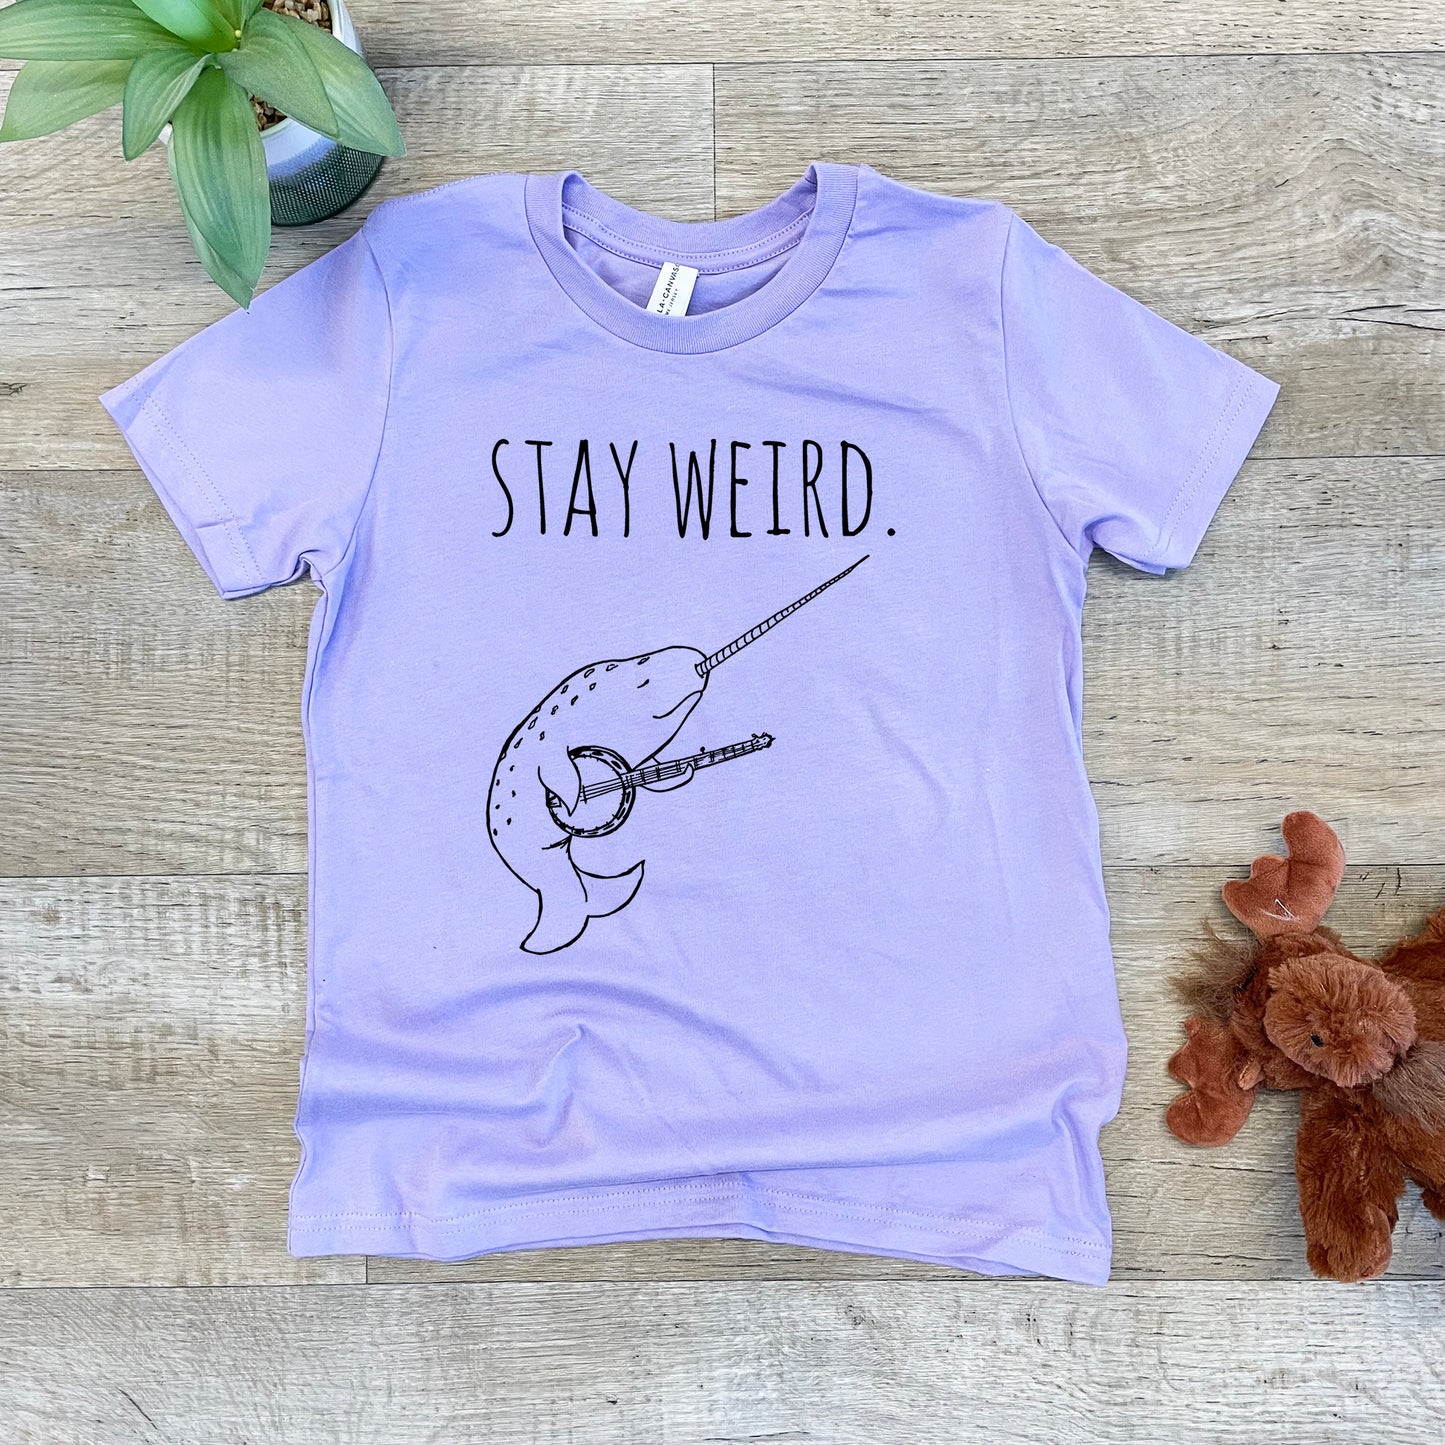 Stay Weird (Narwhal / Banjo) - Kid's Tee - Columbia Blue or Lavender